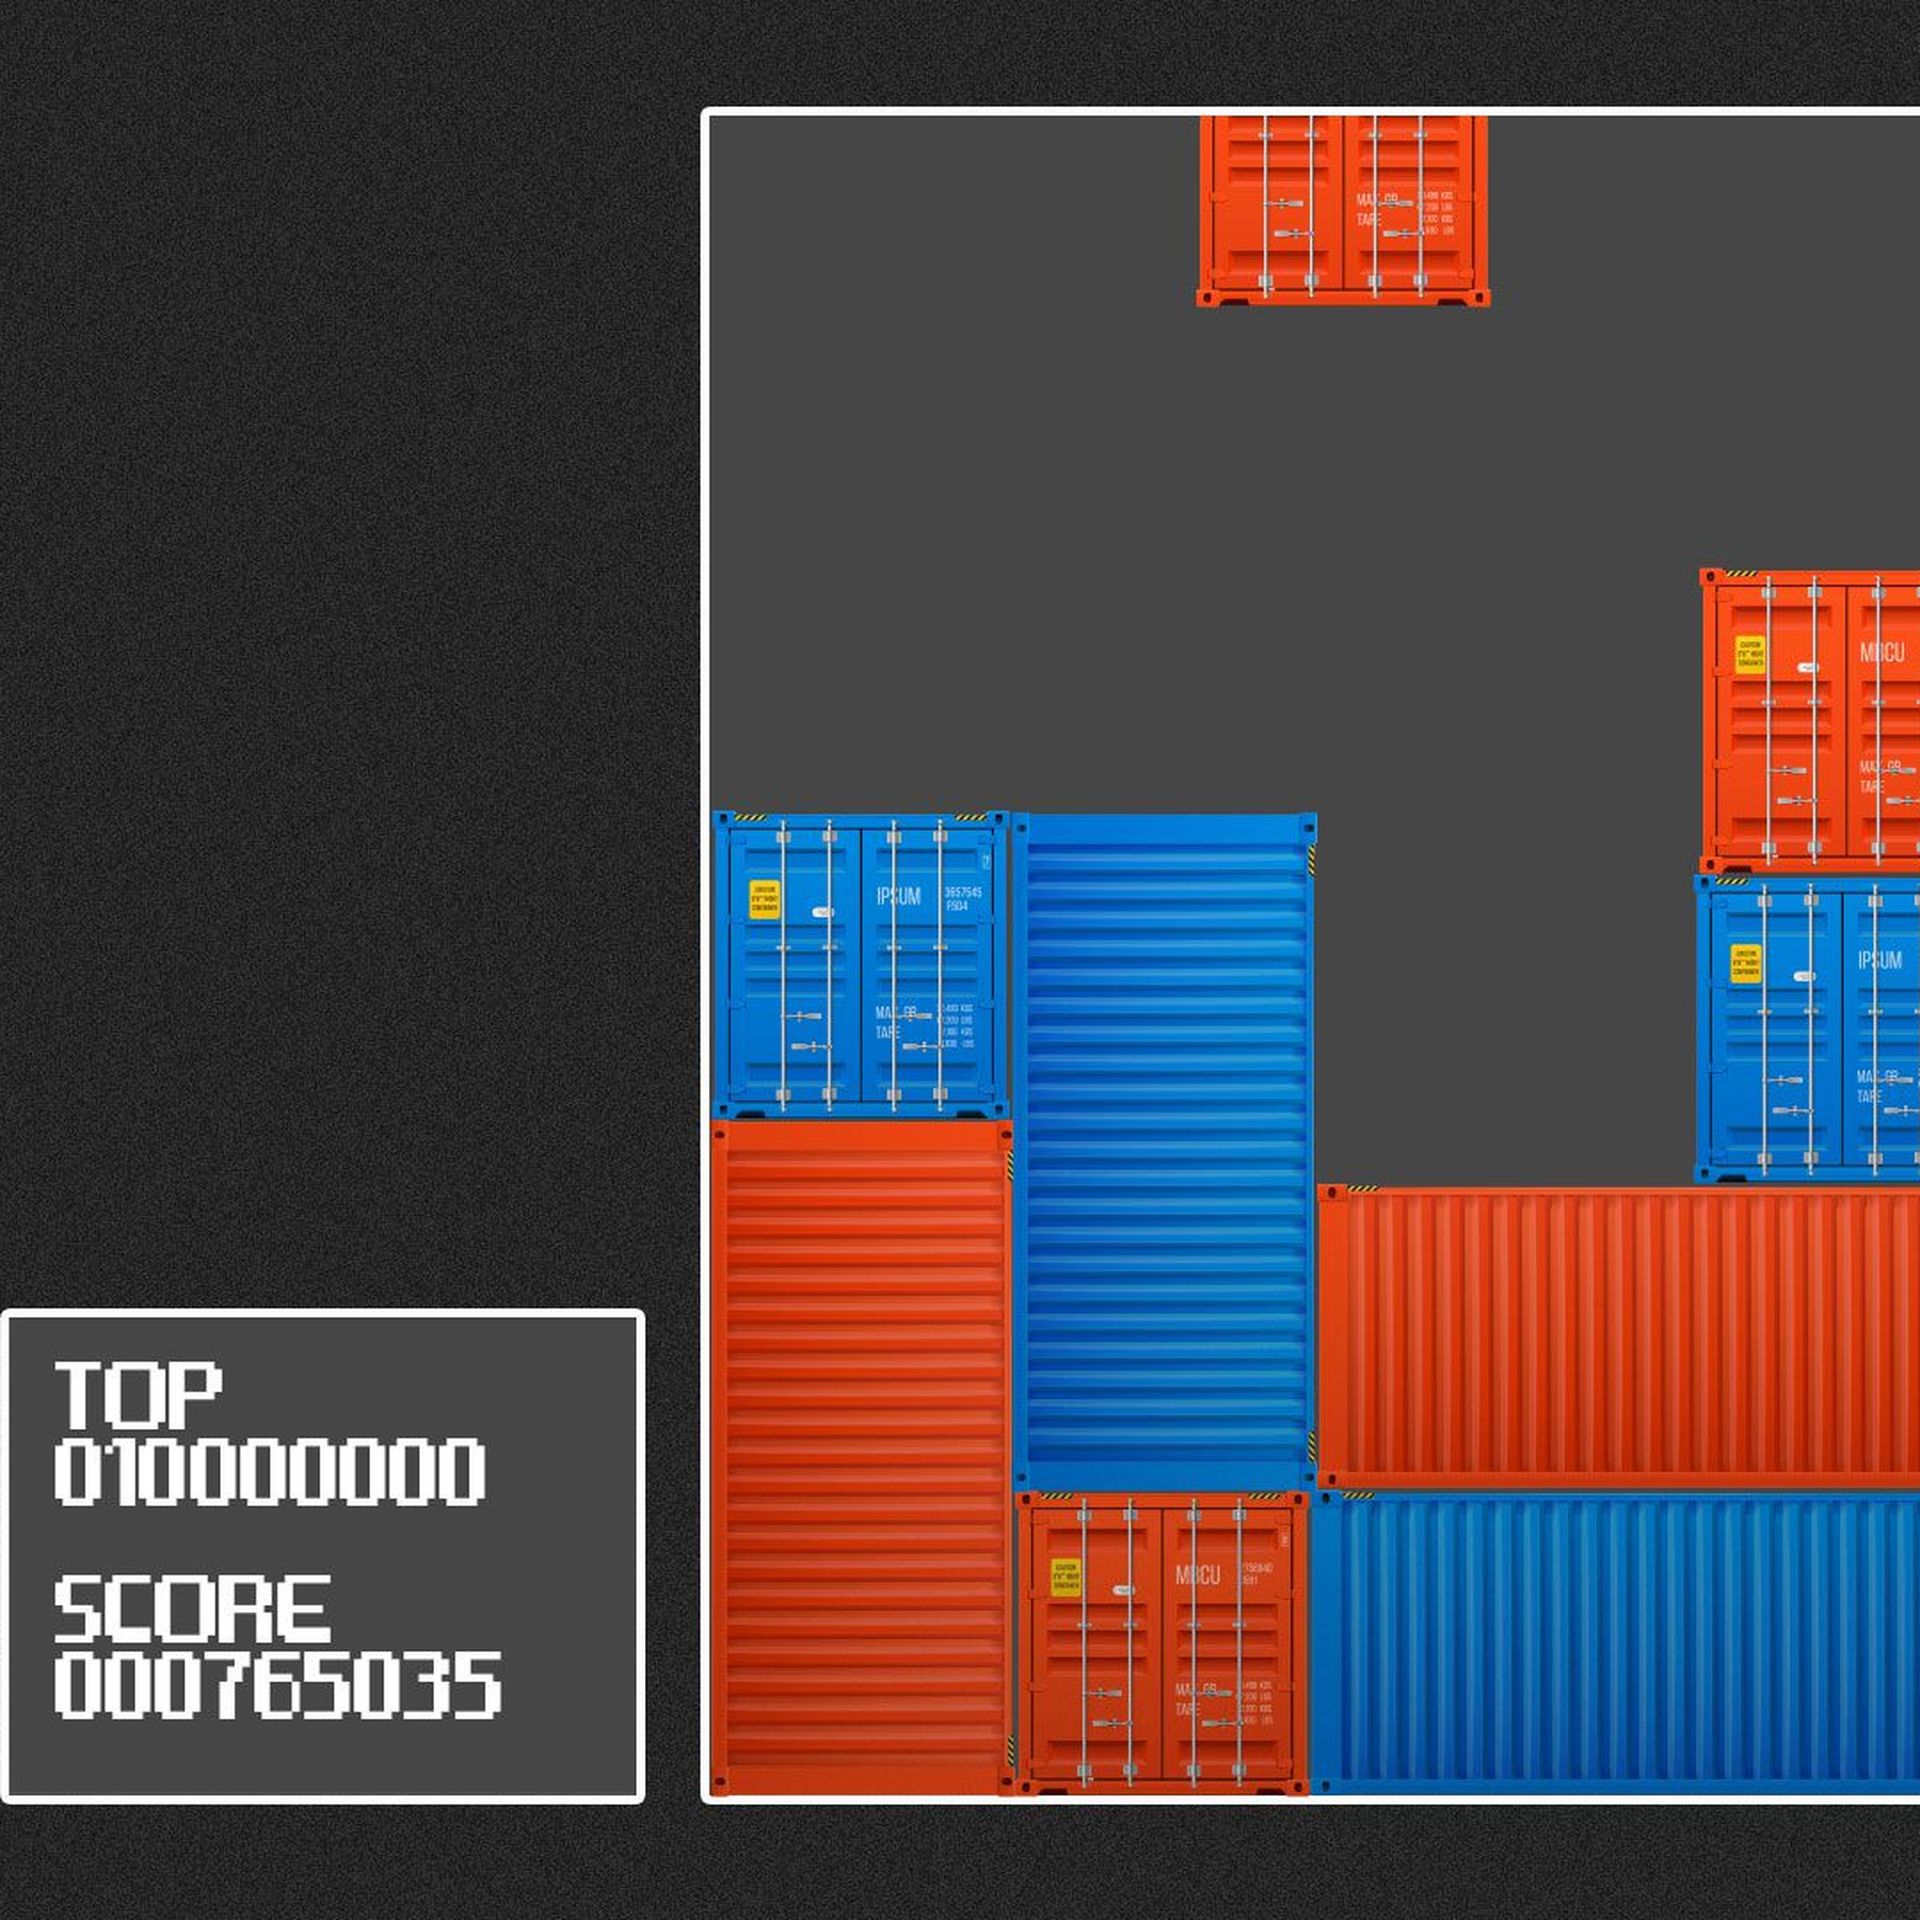 Illustration of a Tetris interface with red and blue shipping containers as the blocks.